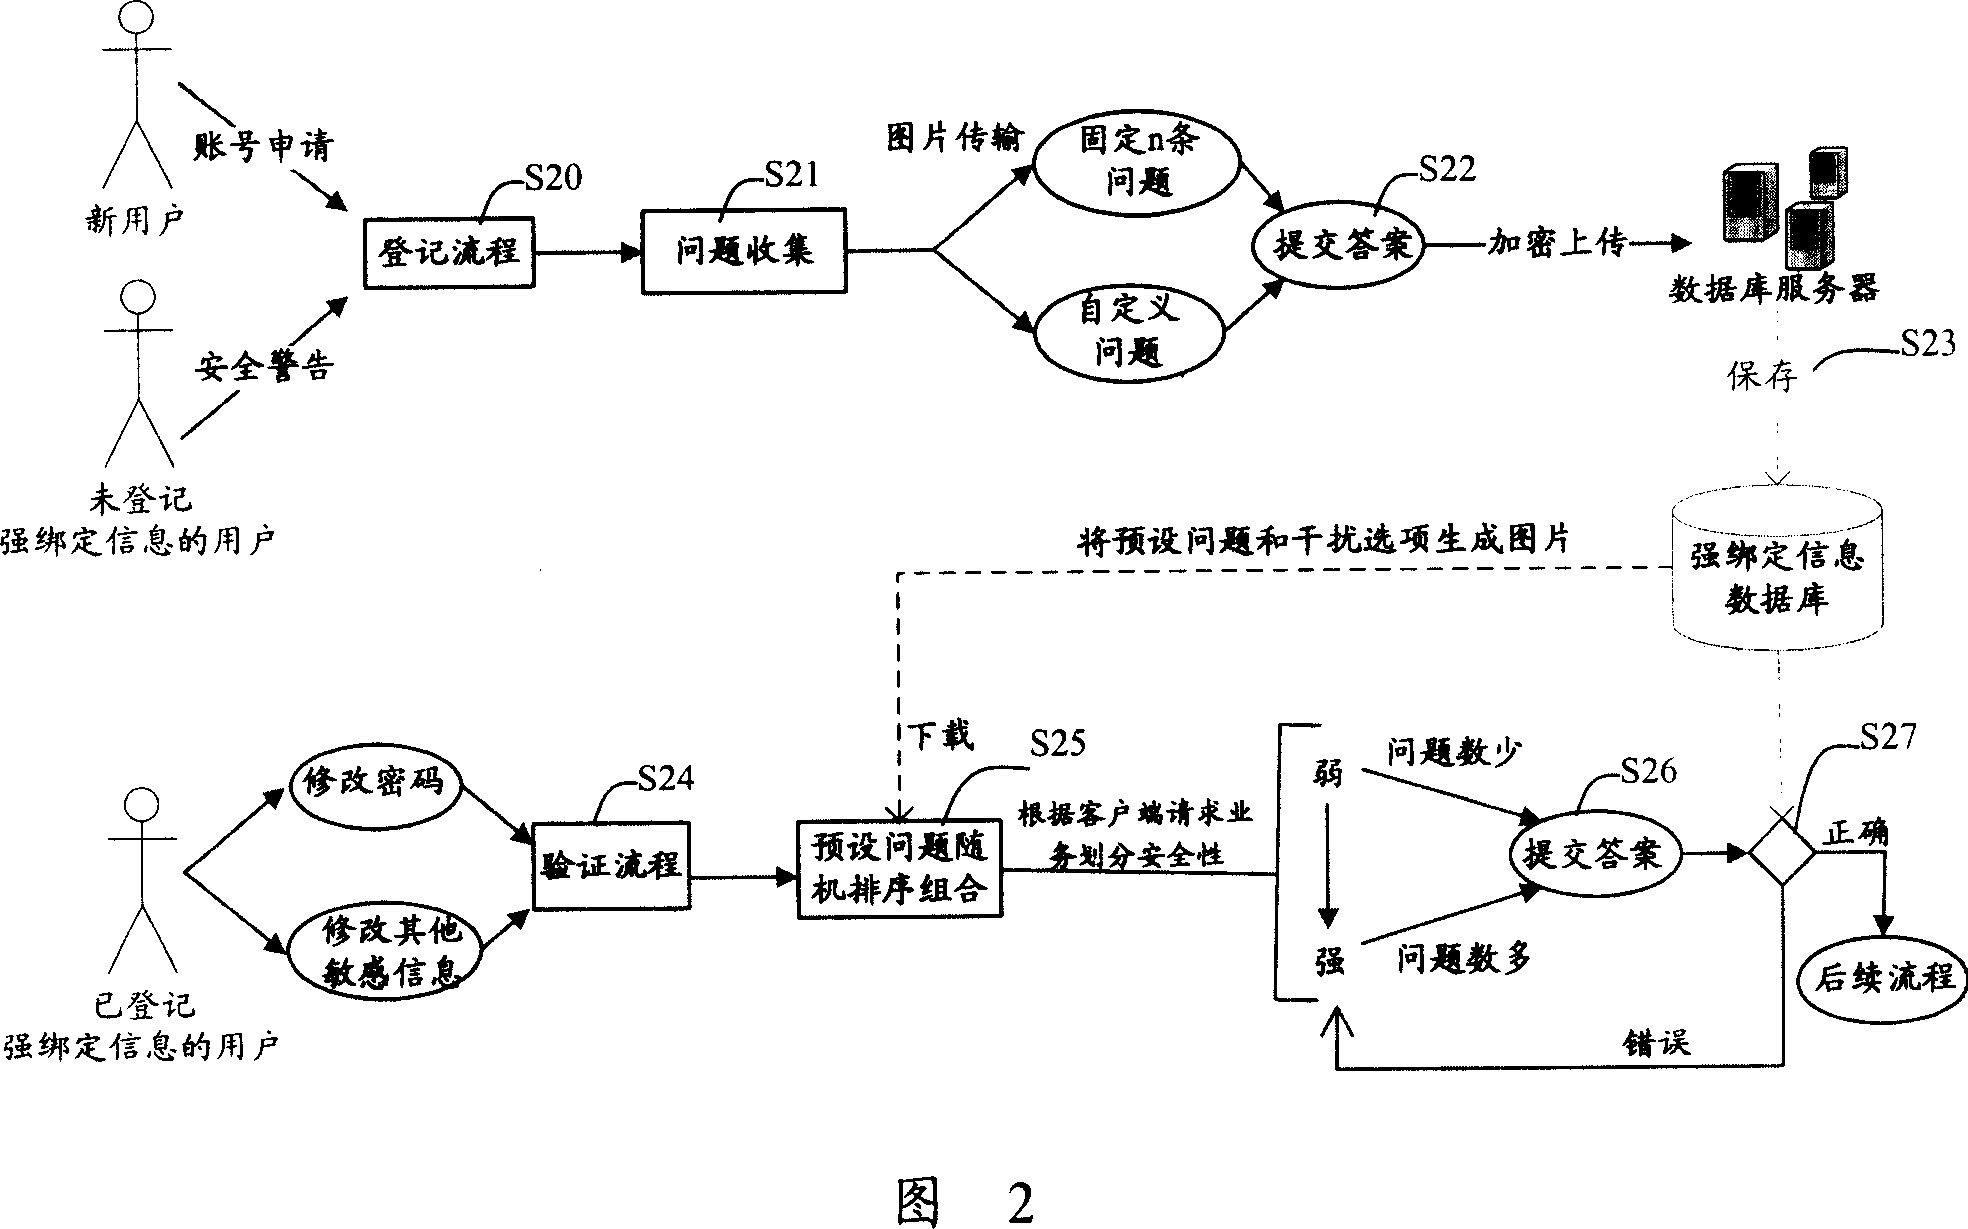 Instant-communication-based accounts security management system and method